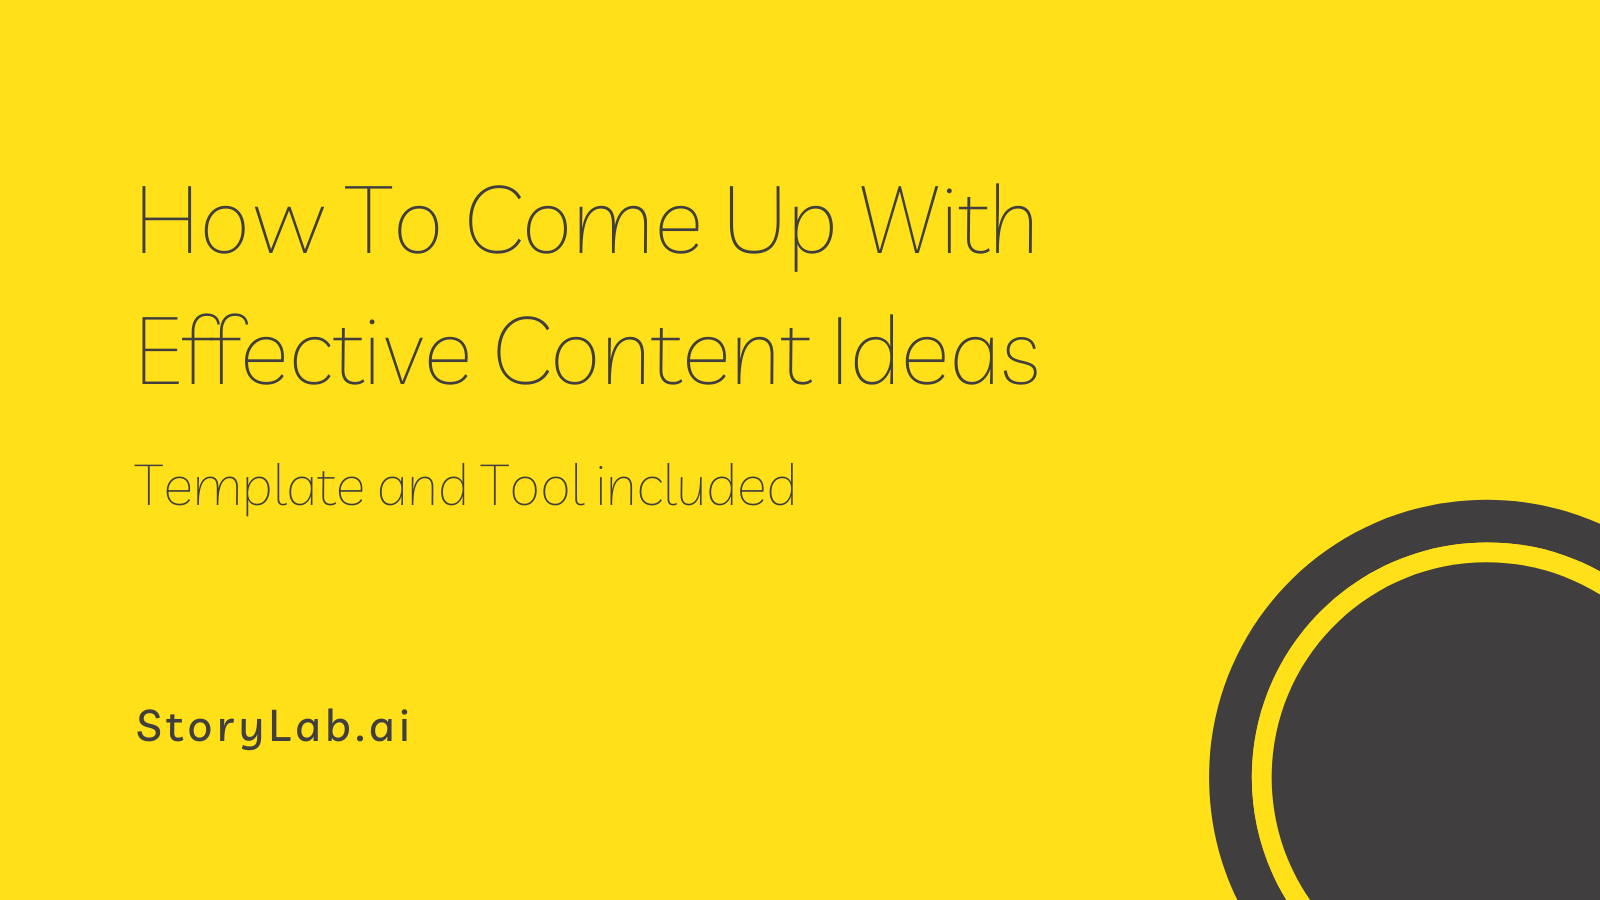 How To Come Up With Effective Content Ideas [Template Included]